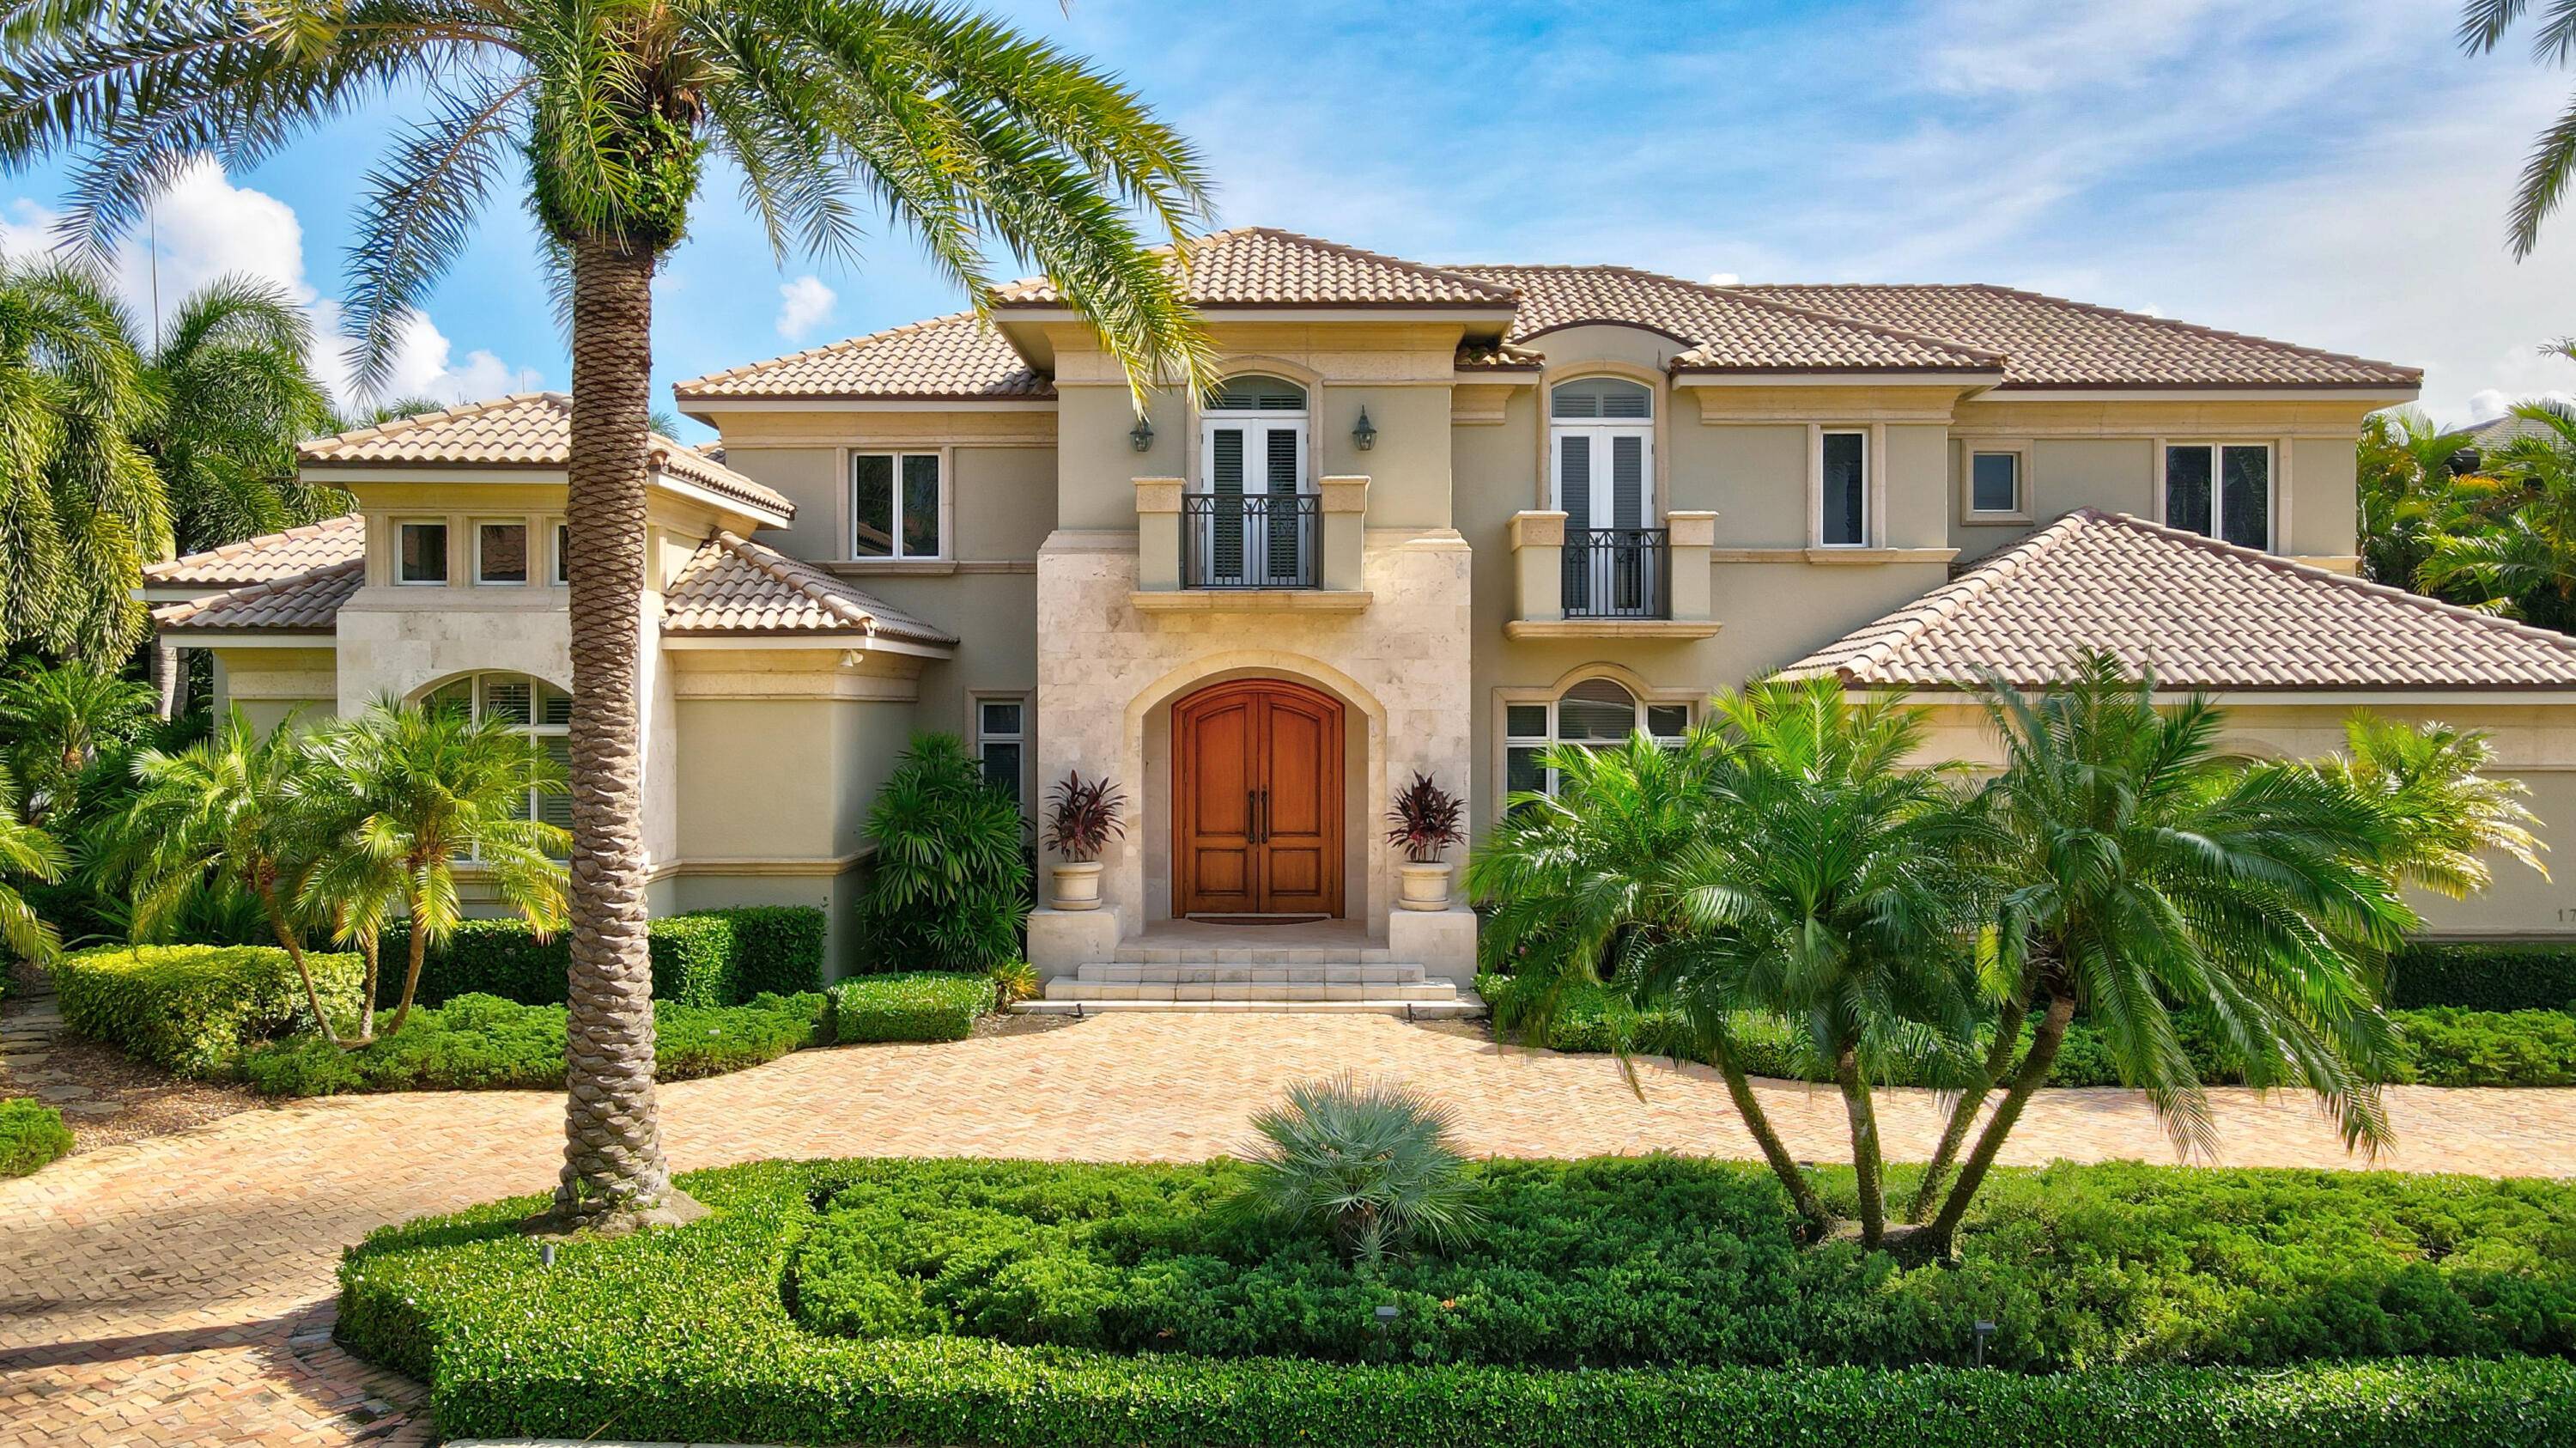 Introducing 174 West Coconut Palm Road ; an exquisite estate situated in one of Boca Raton's most prestigious communities, Royal Palm Yacht Country Club.